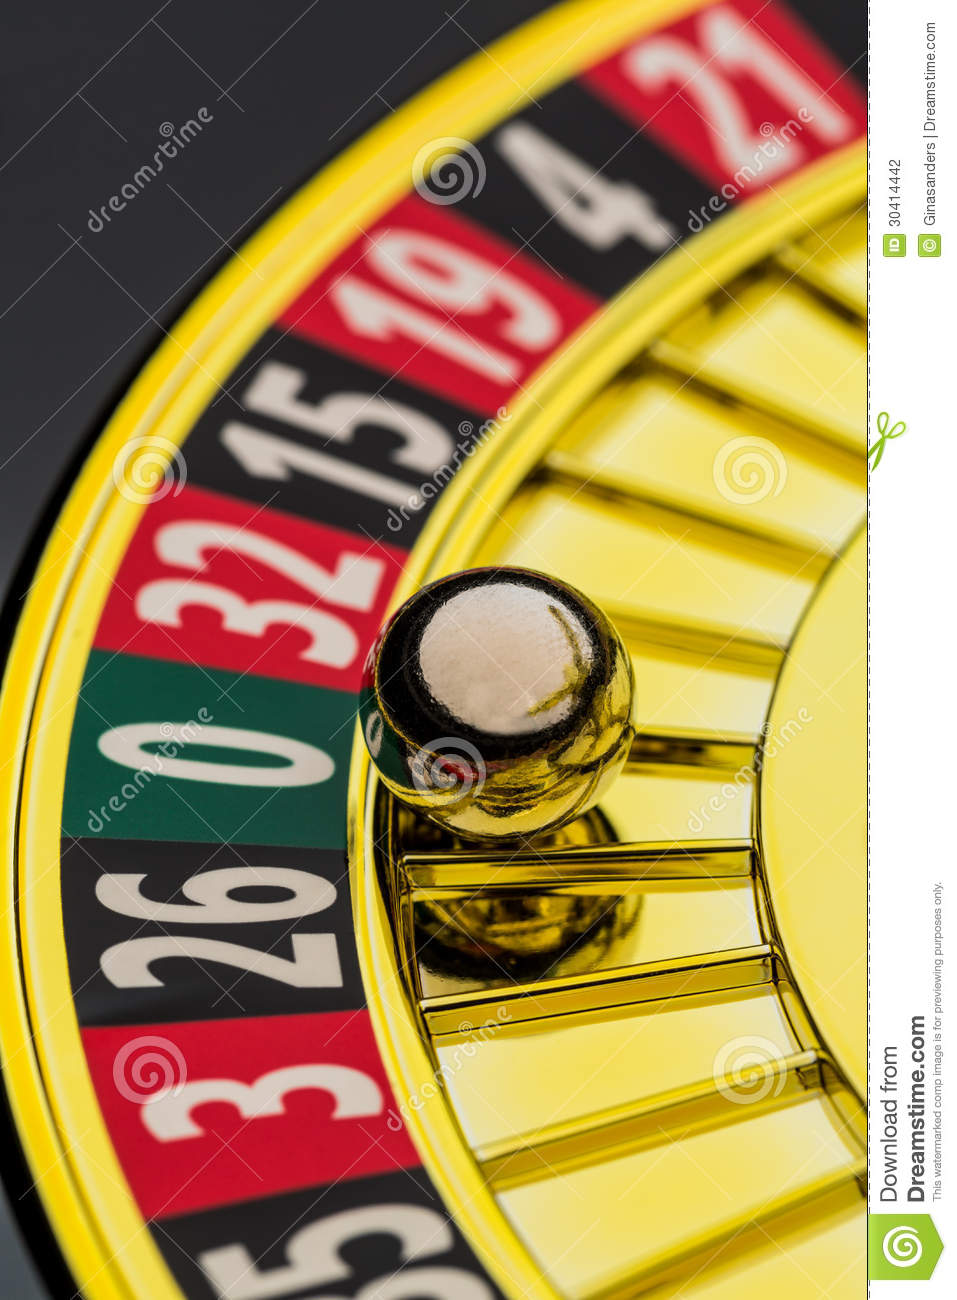 The Cylinder Of A Roulette Gambling In A Casino  Winning Or Losing Is